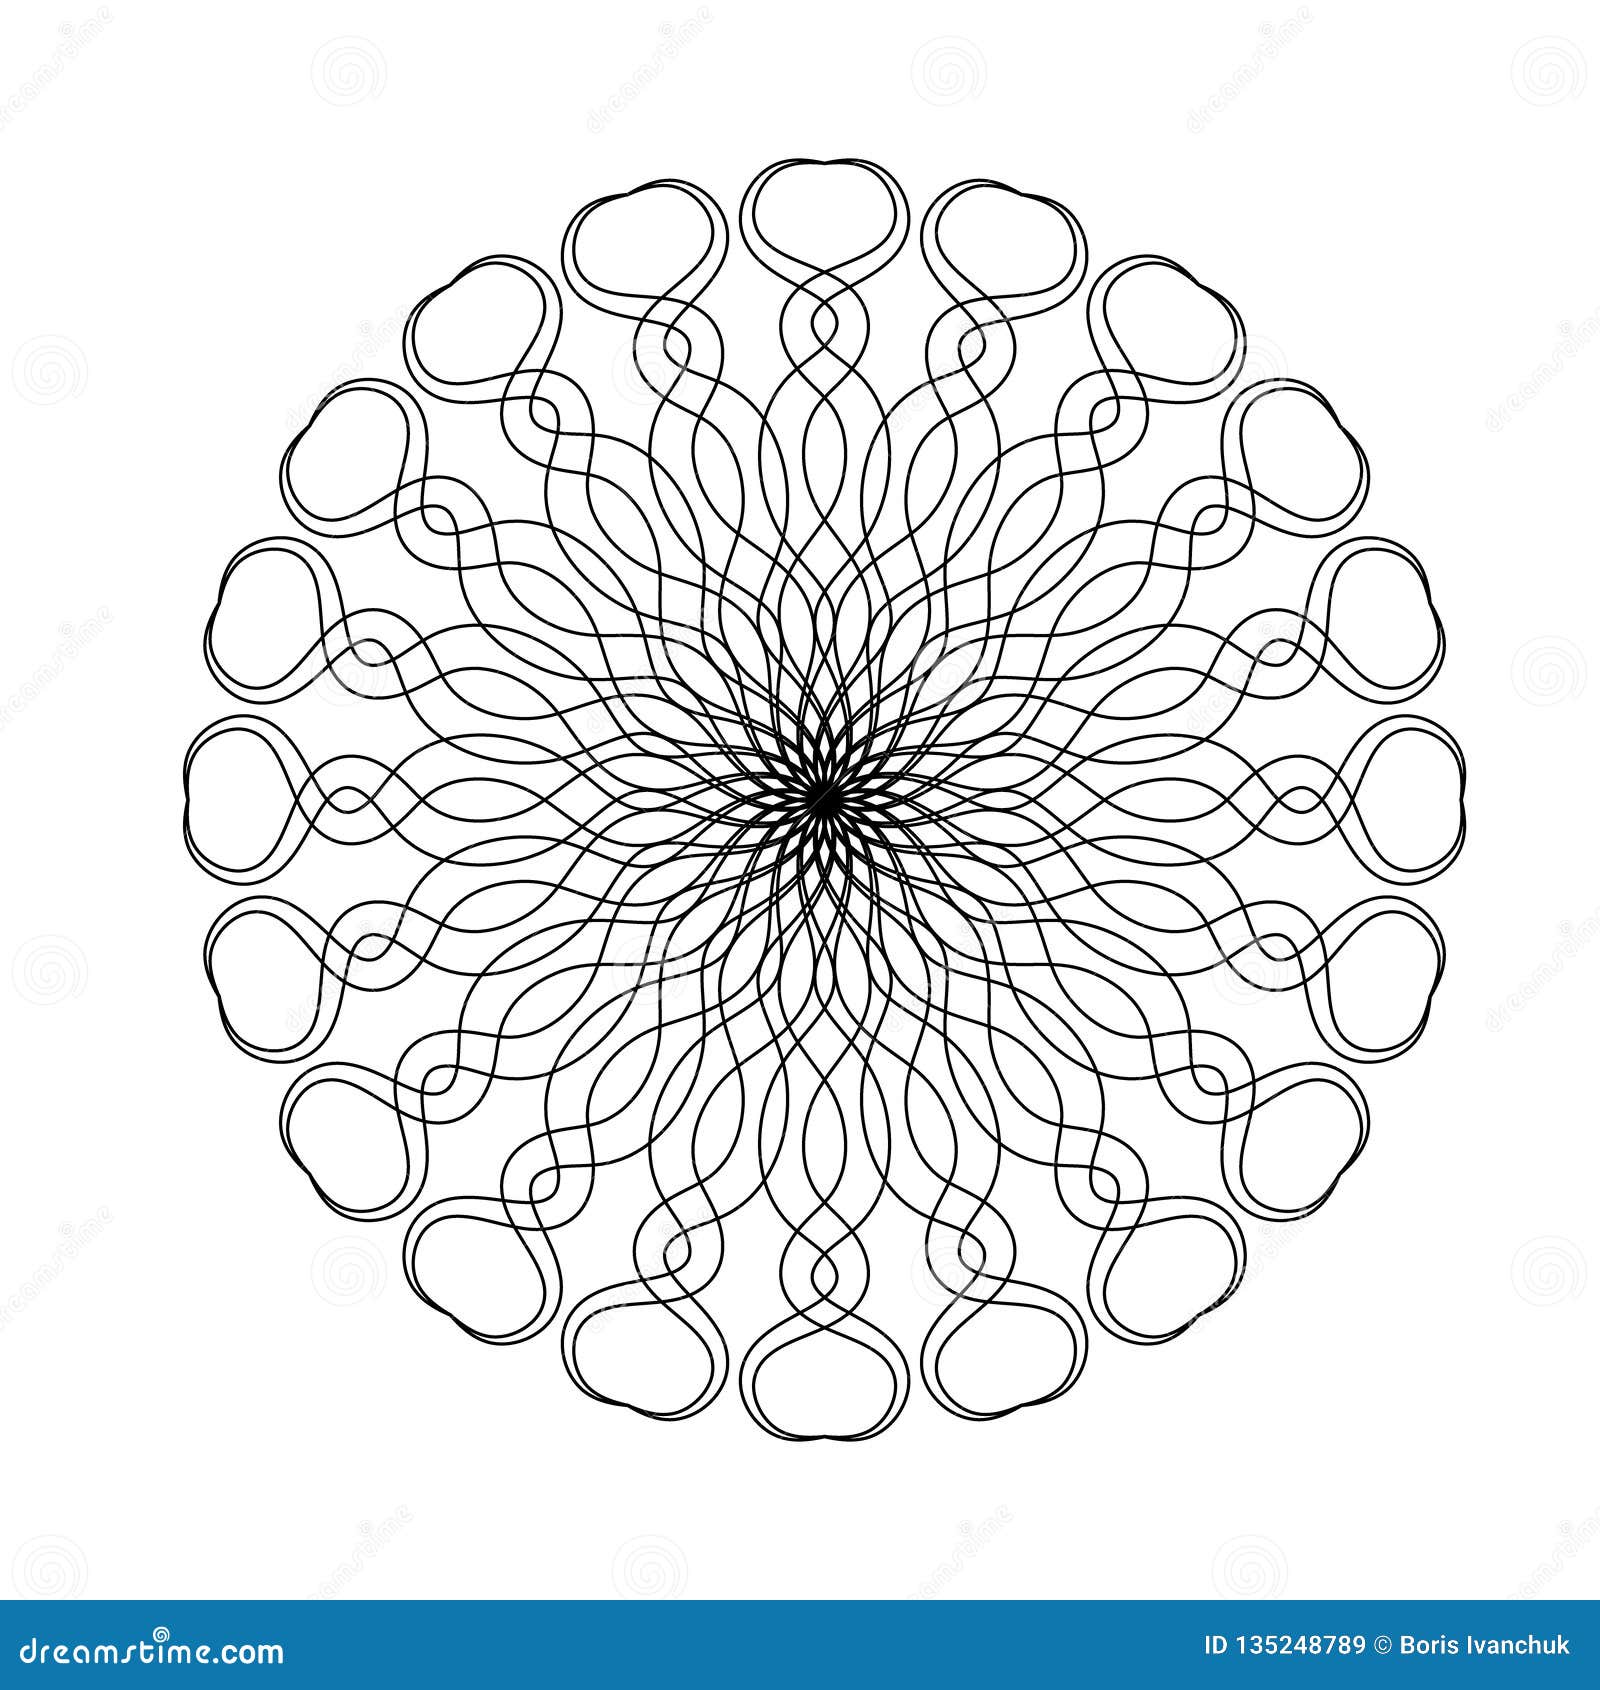 Download Simple Round Mandala Tattoo Coloring Book On White Background Stock Vector Illustration Of Abstract Floral 135248789